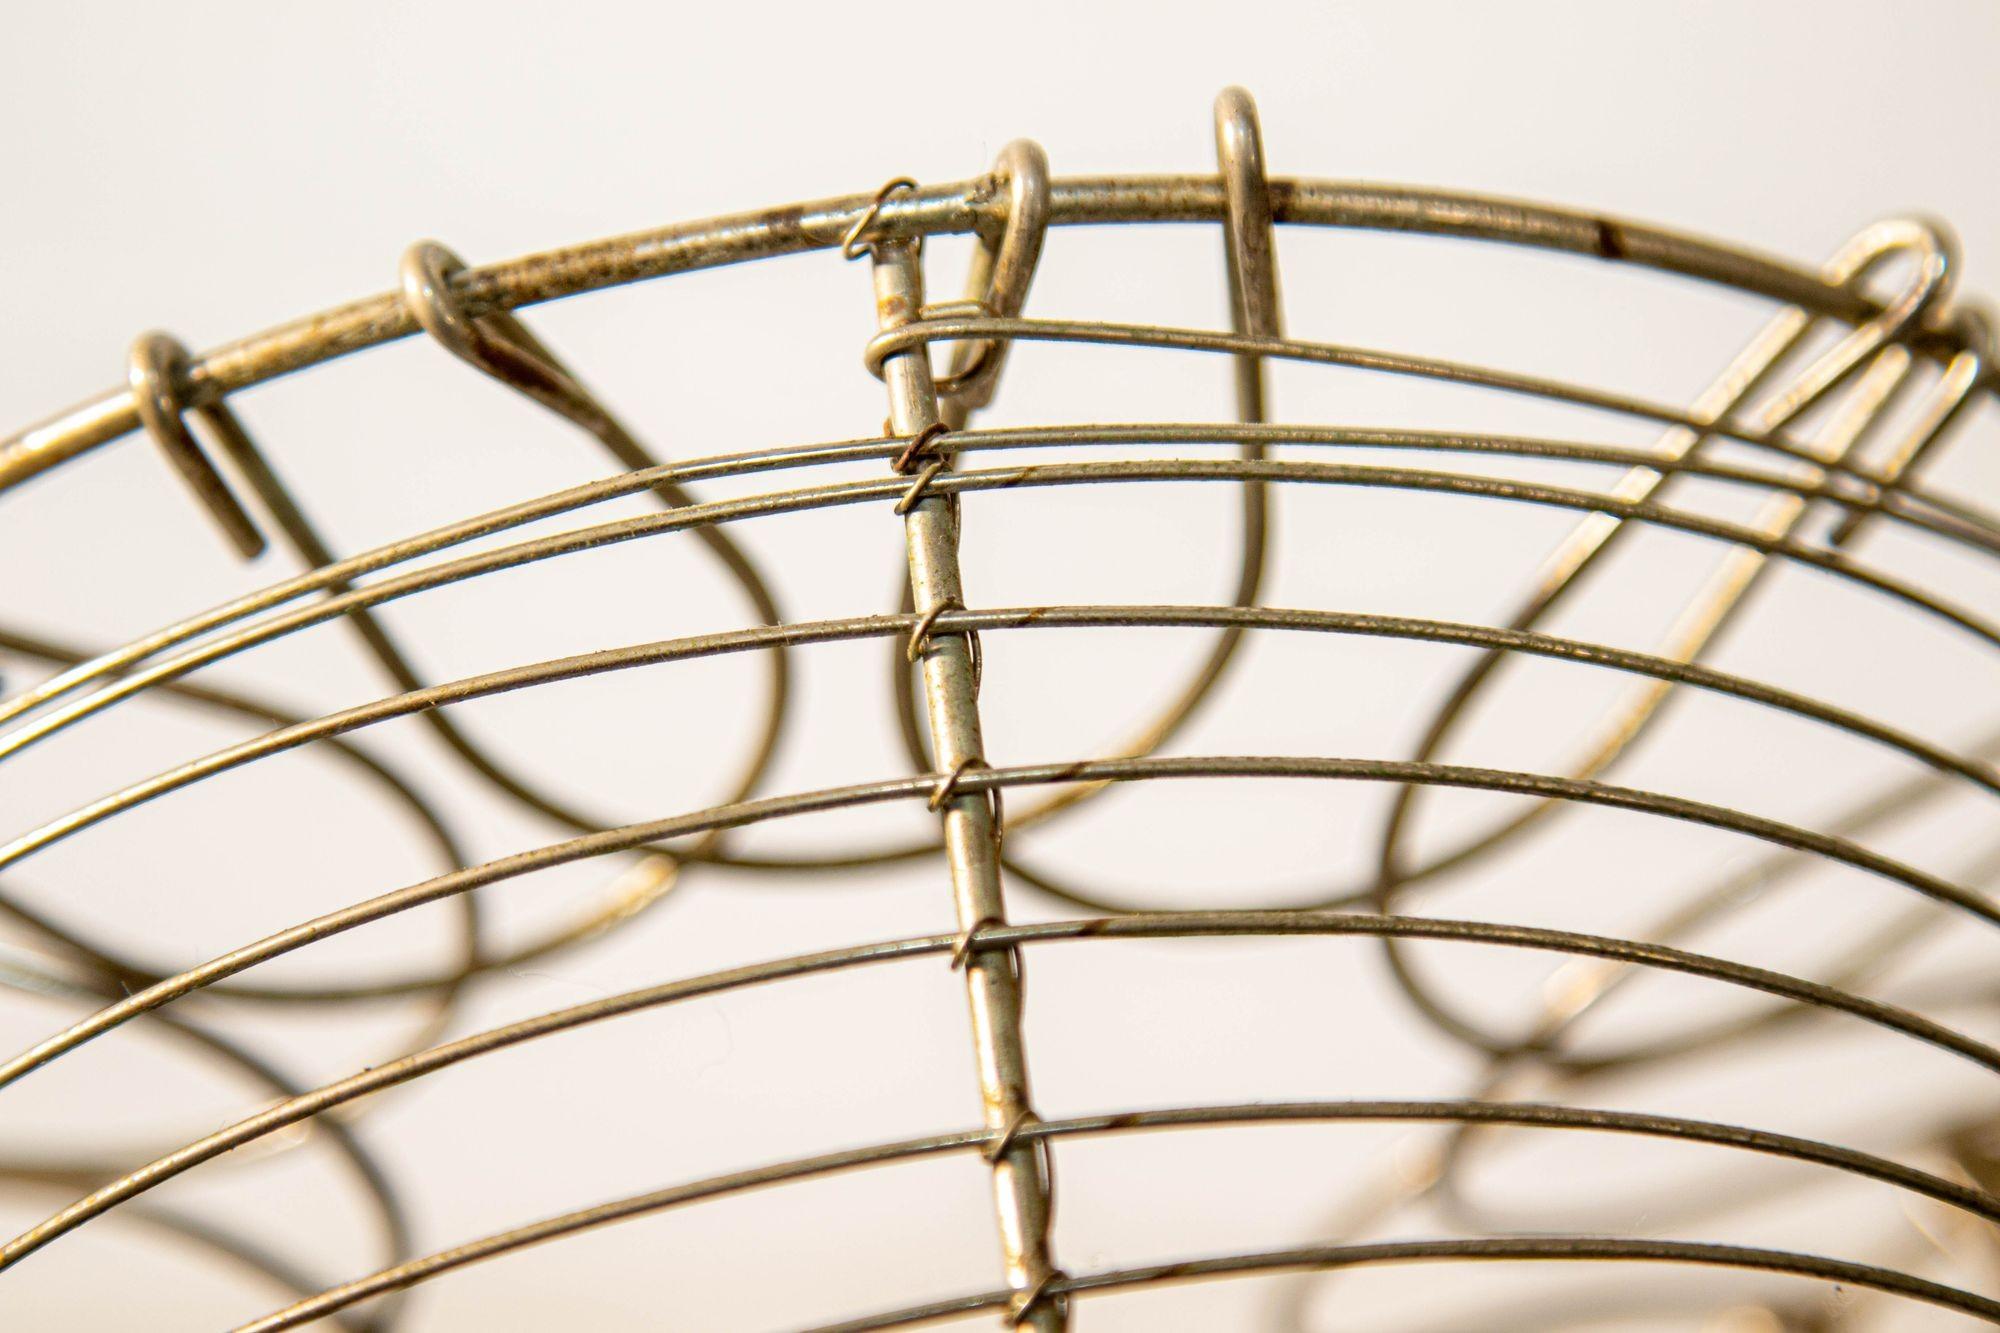 Antique Metal Wire Egg Basket Rustic French Farmhouse Decor In Good Condition For Sale In North Hollywood, CA